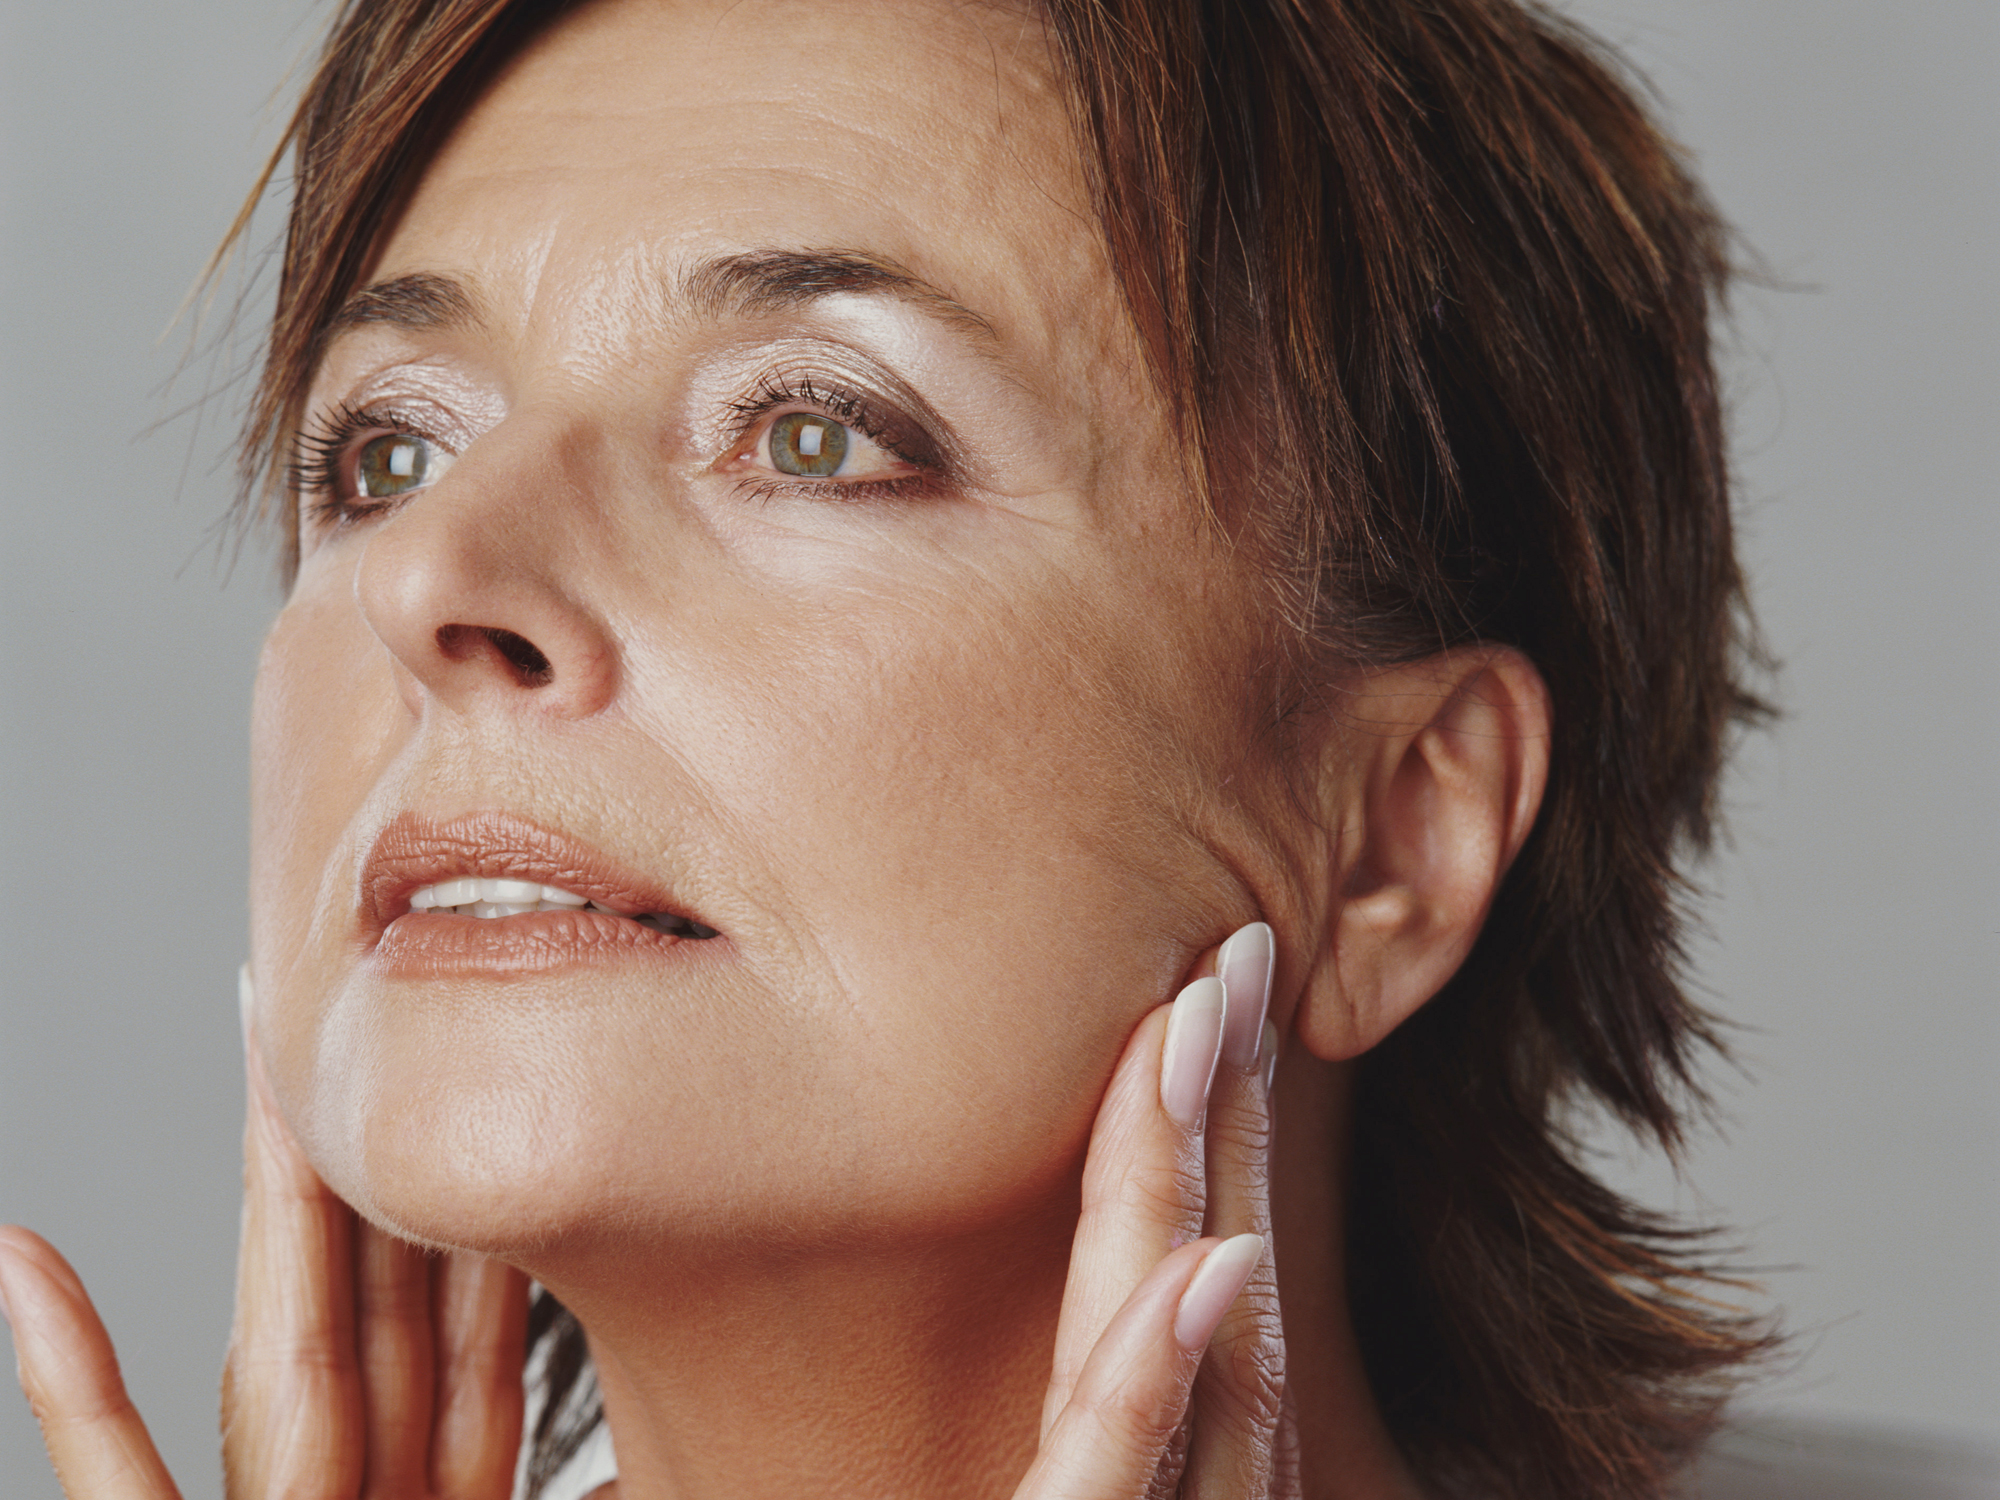 The free wrinkle miracle that really works